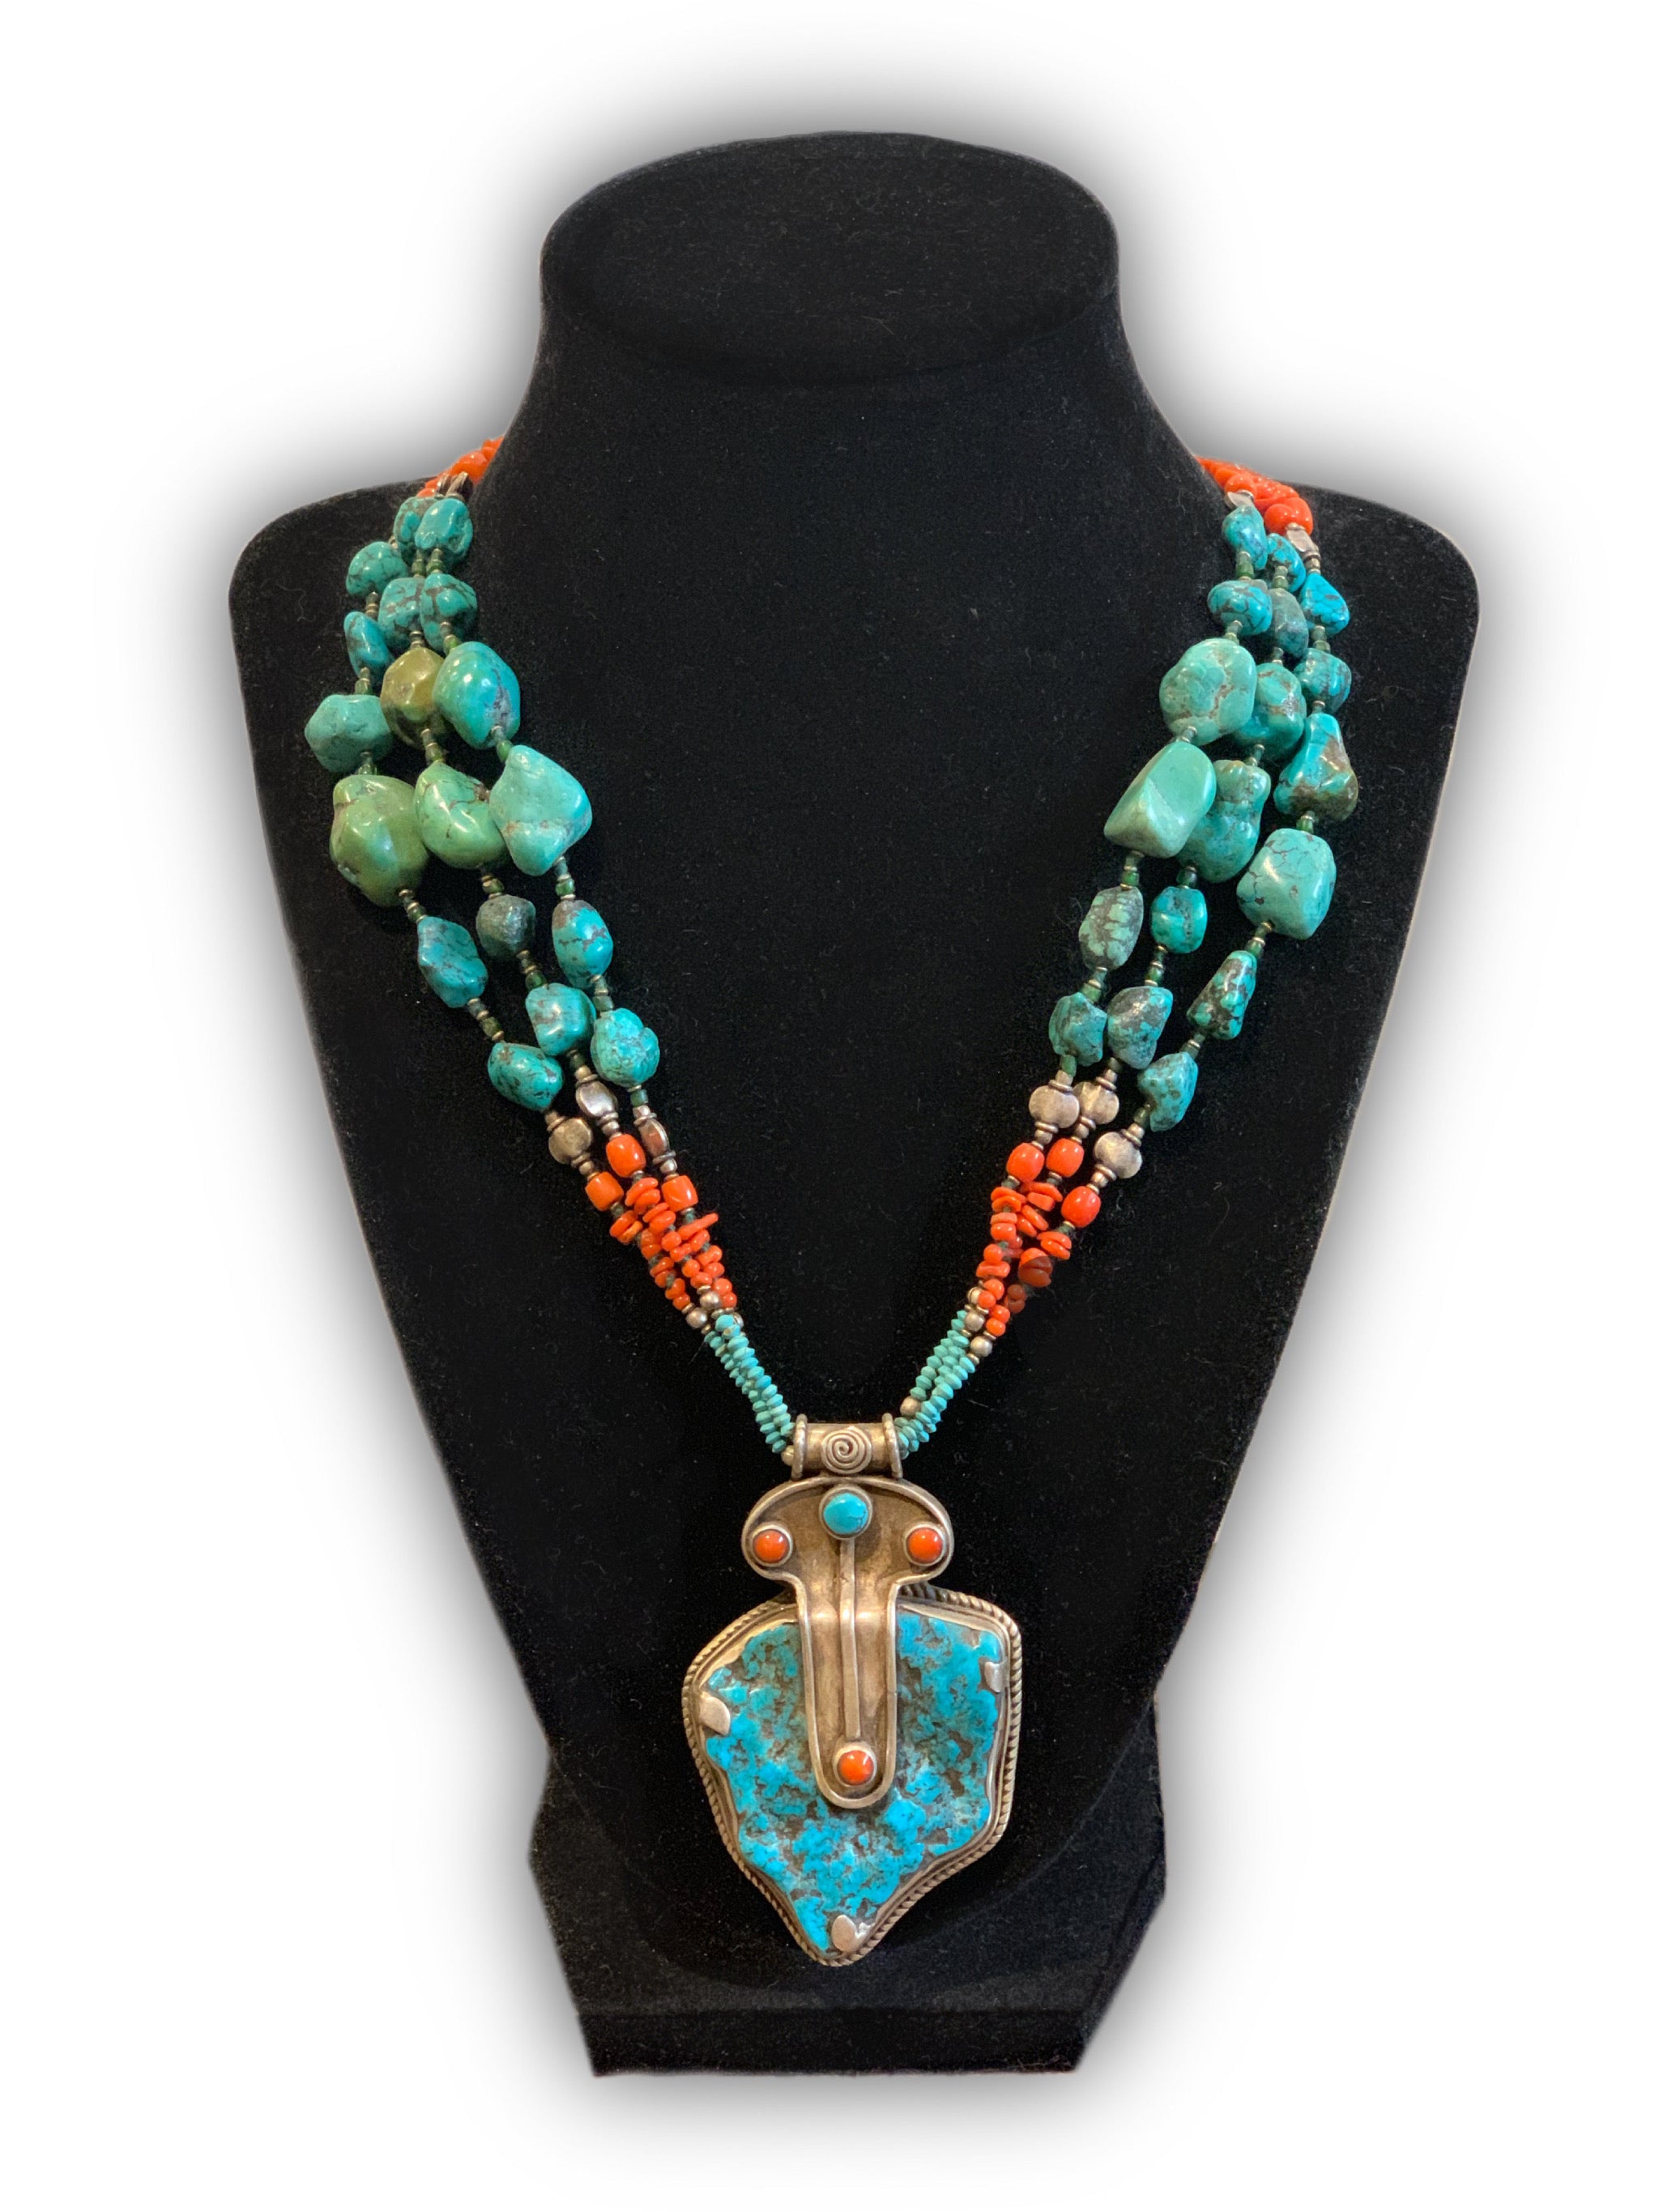 Old turquoise silver necklace